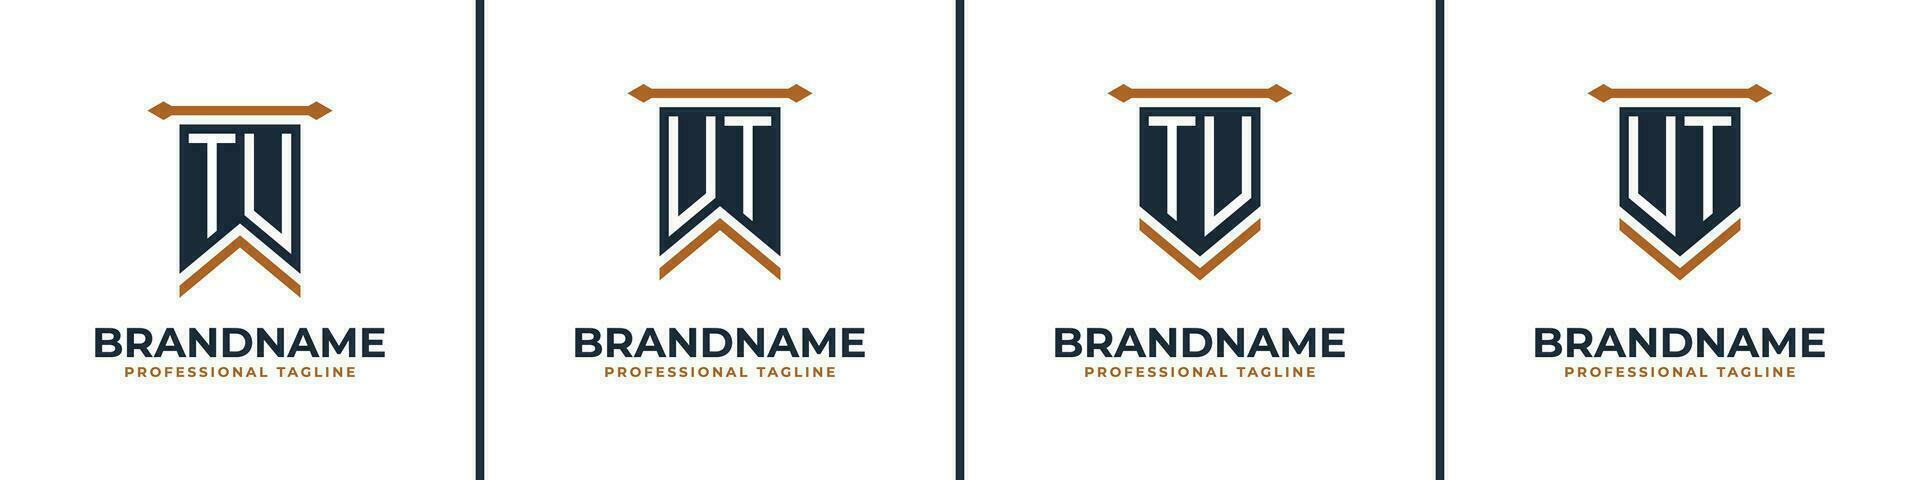 Letter TU and UT Pennant Flag Logo Set, Represent Victory. Suitable for any business with TU or UT initials. vector